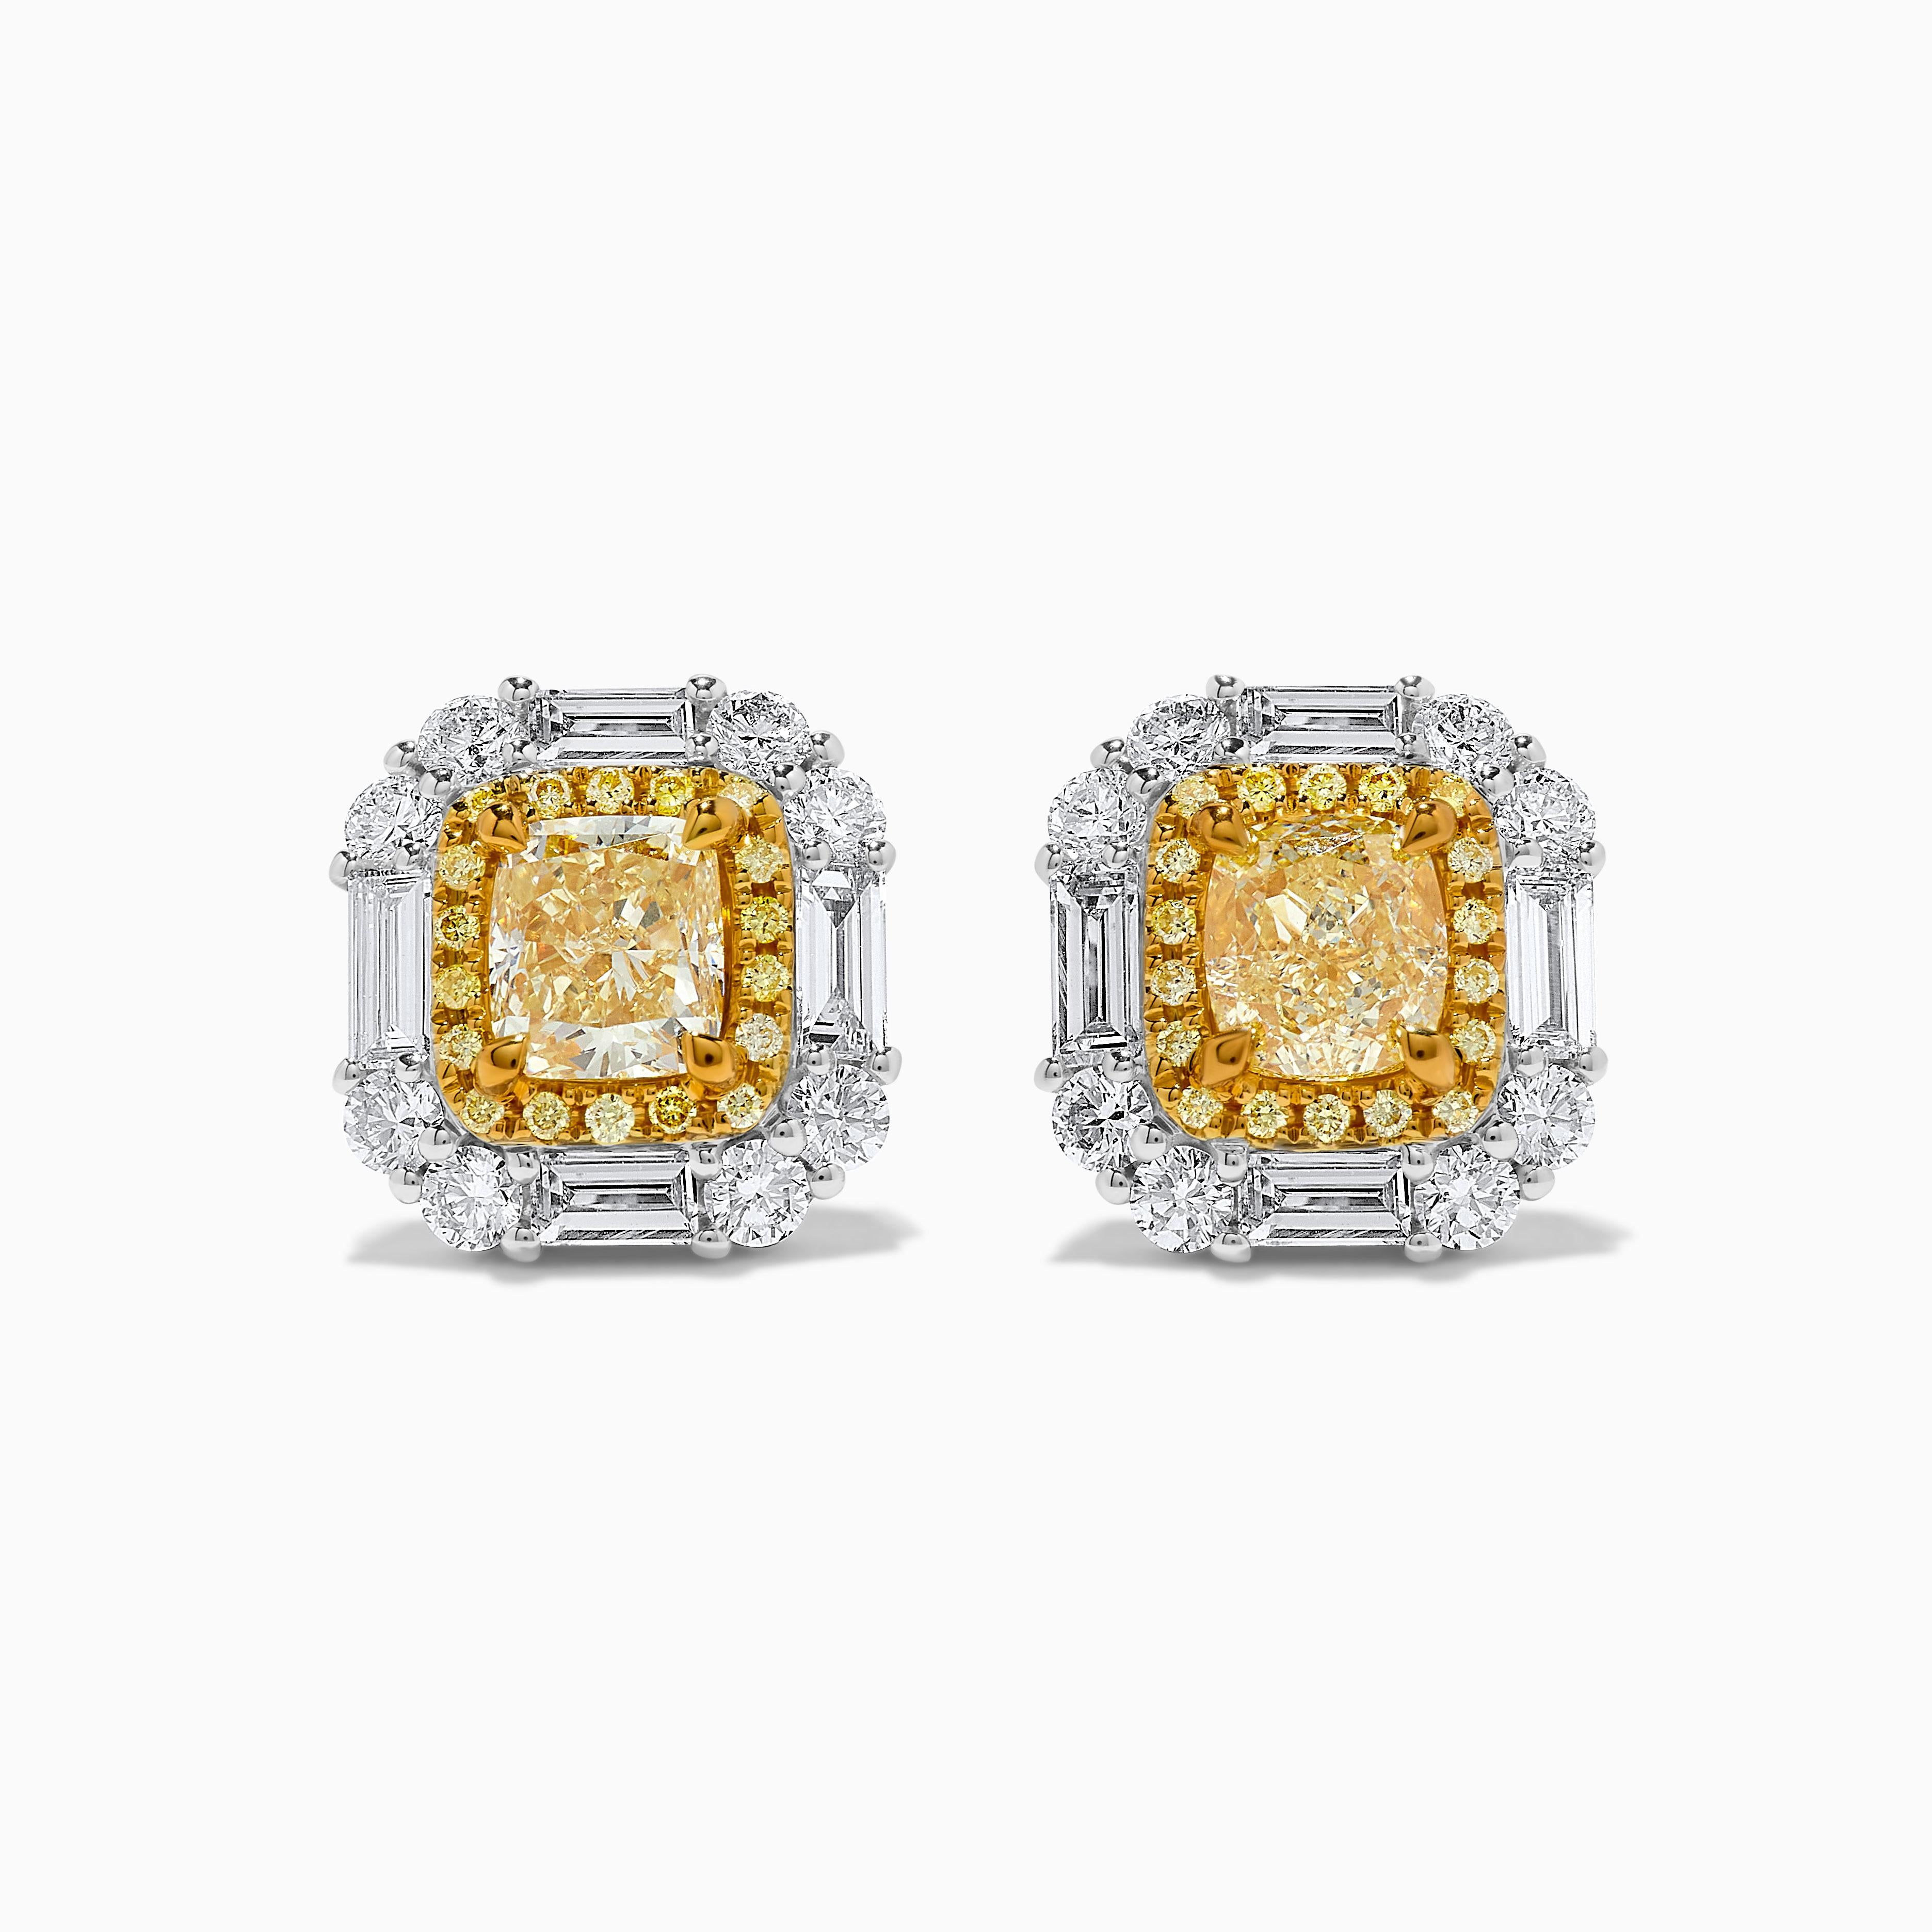 Contemporary Natural Yellow Cushion Diamond 3.65 Carat TW Gold Stud Earrings For Sale